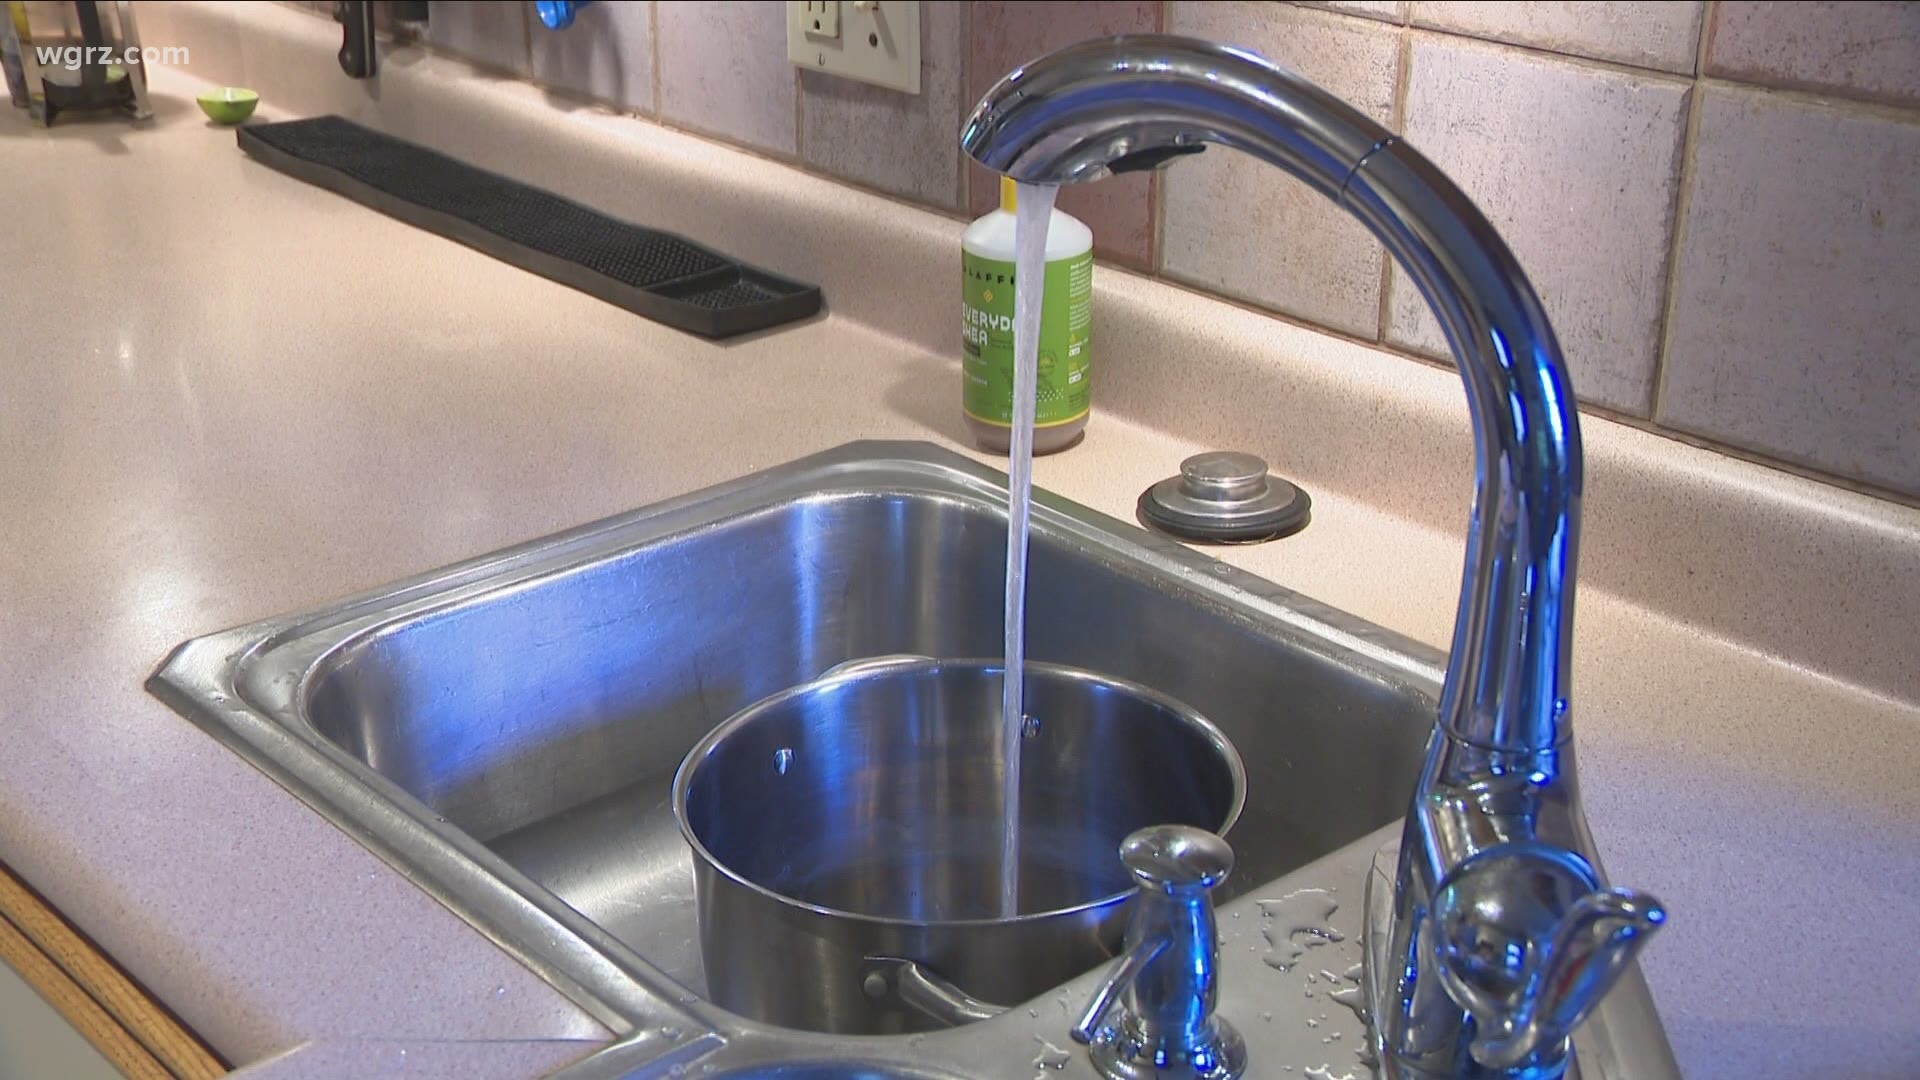 We want to remind Mayville residents not to use their water for drinking, cooking, food preparation or brushing your teeth.